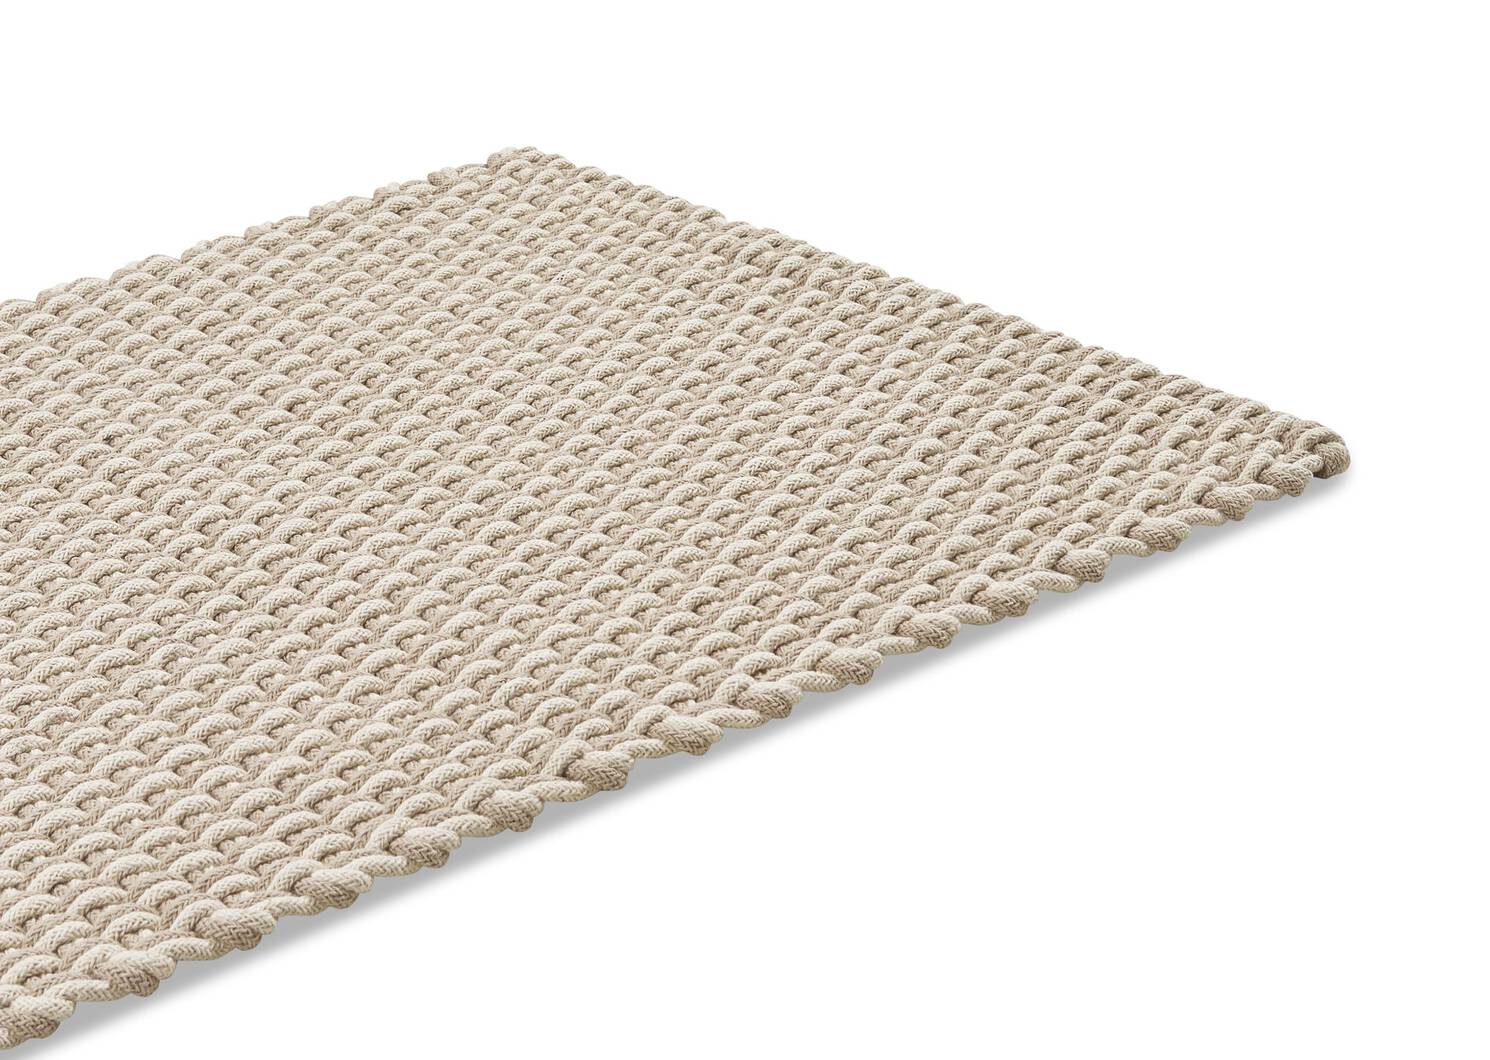 Islet Accent Rug 24x36 Ivory/Ash